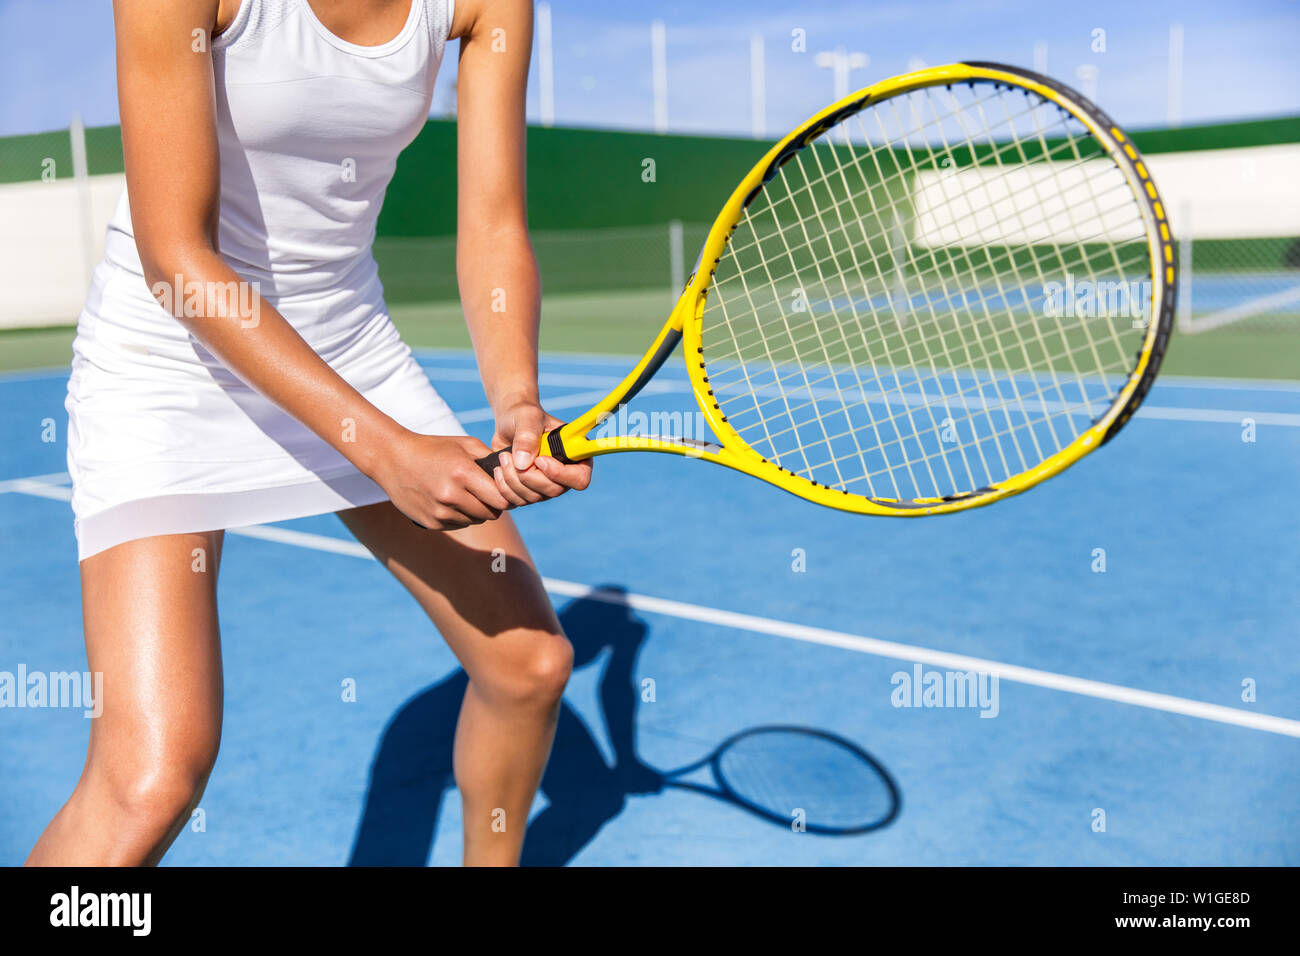 Midsection of tennis player woman ready playing game on blue hard court outdoor in position holding racket wearing white dress skirt. Female athlete sporty girl for summer sports activity course. Stock Photo